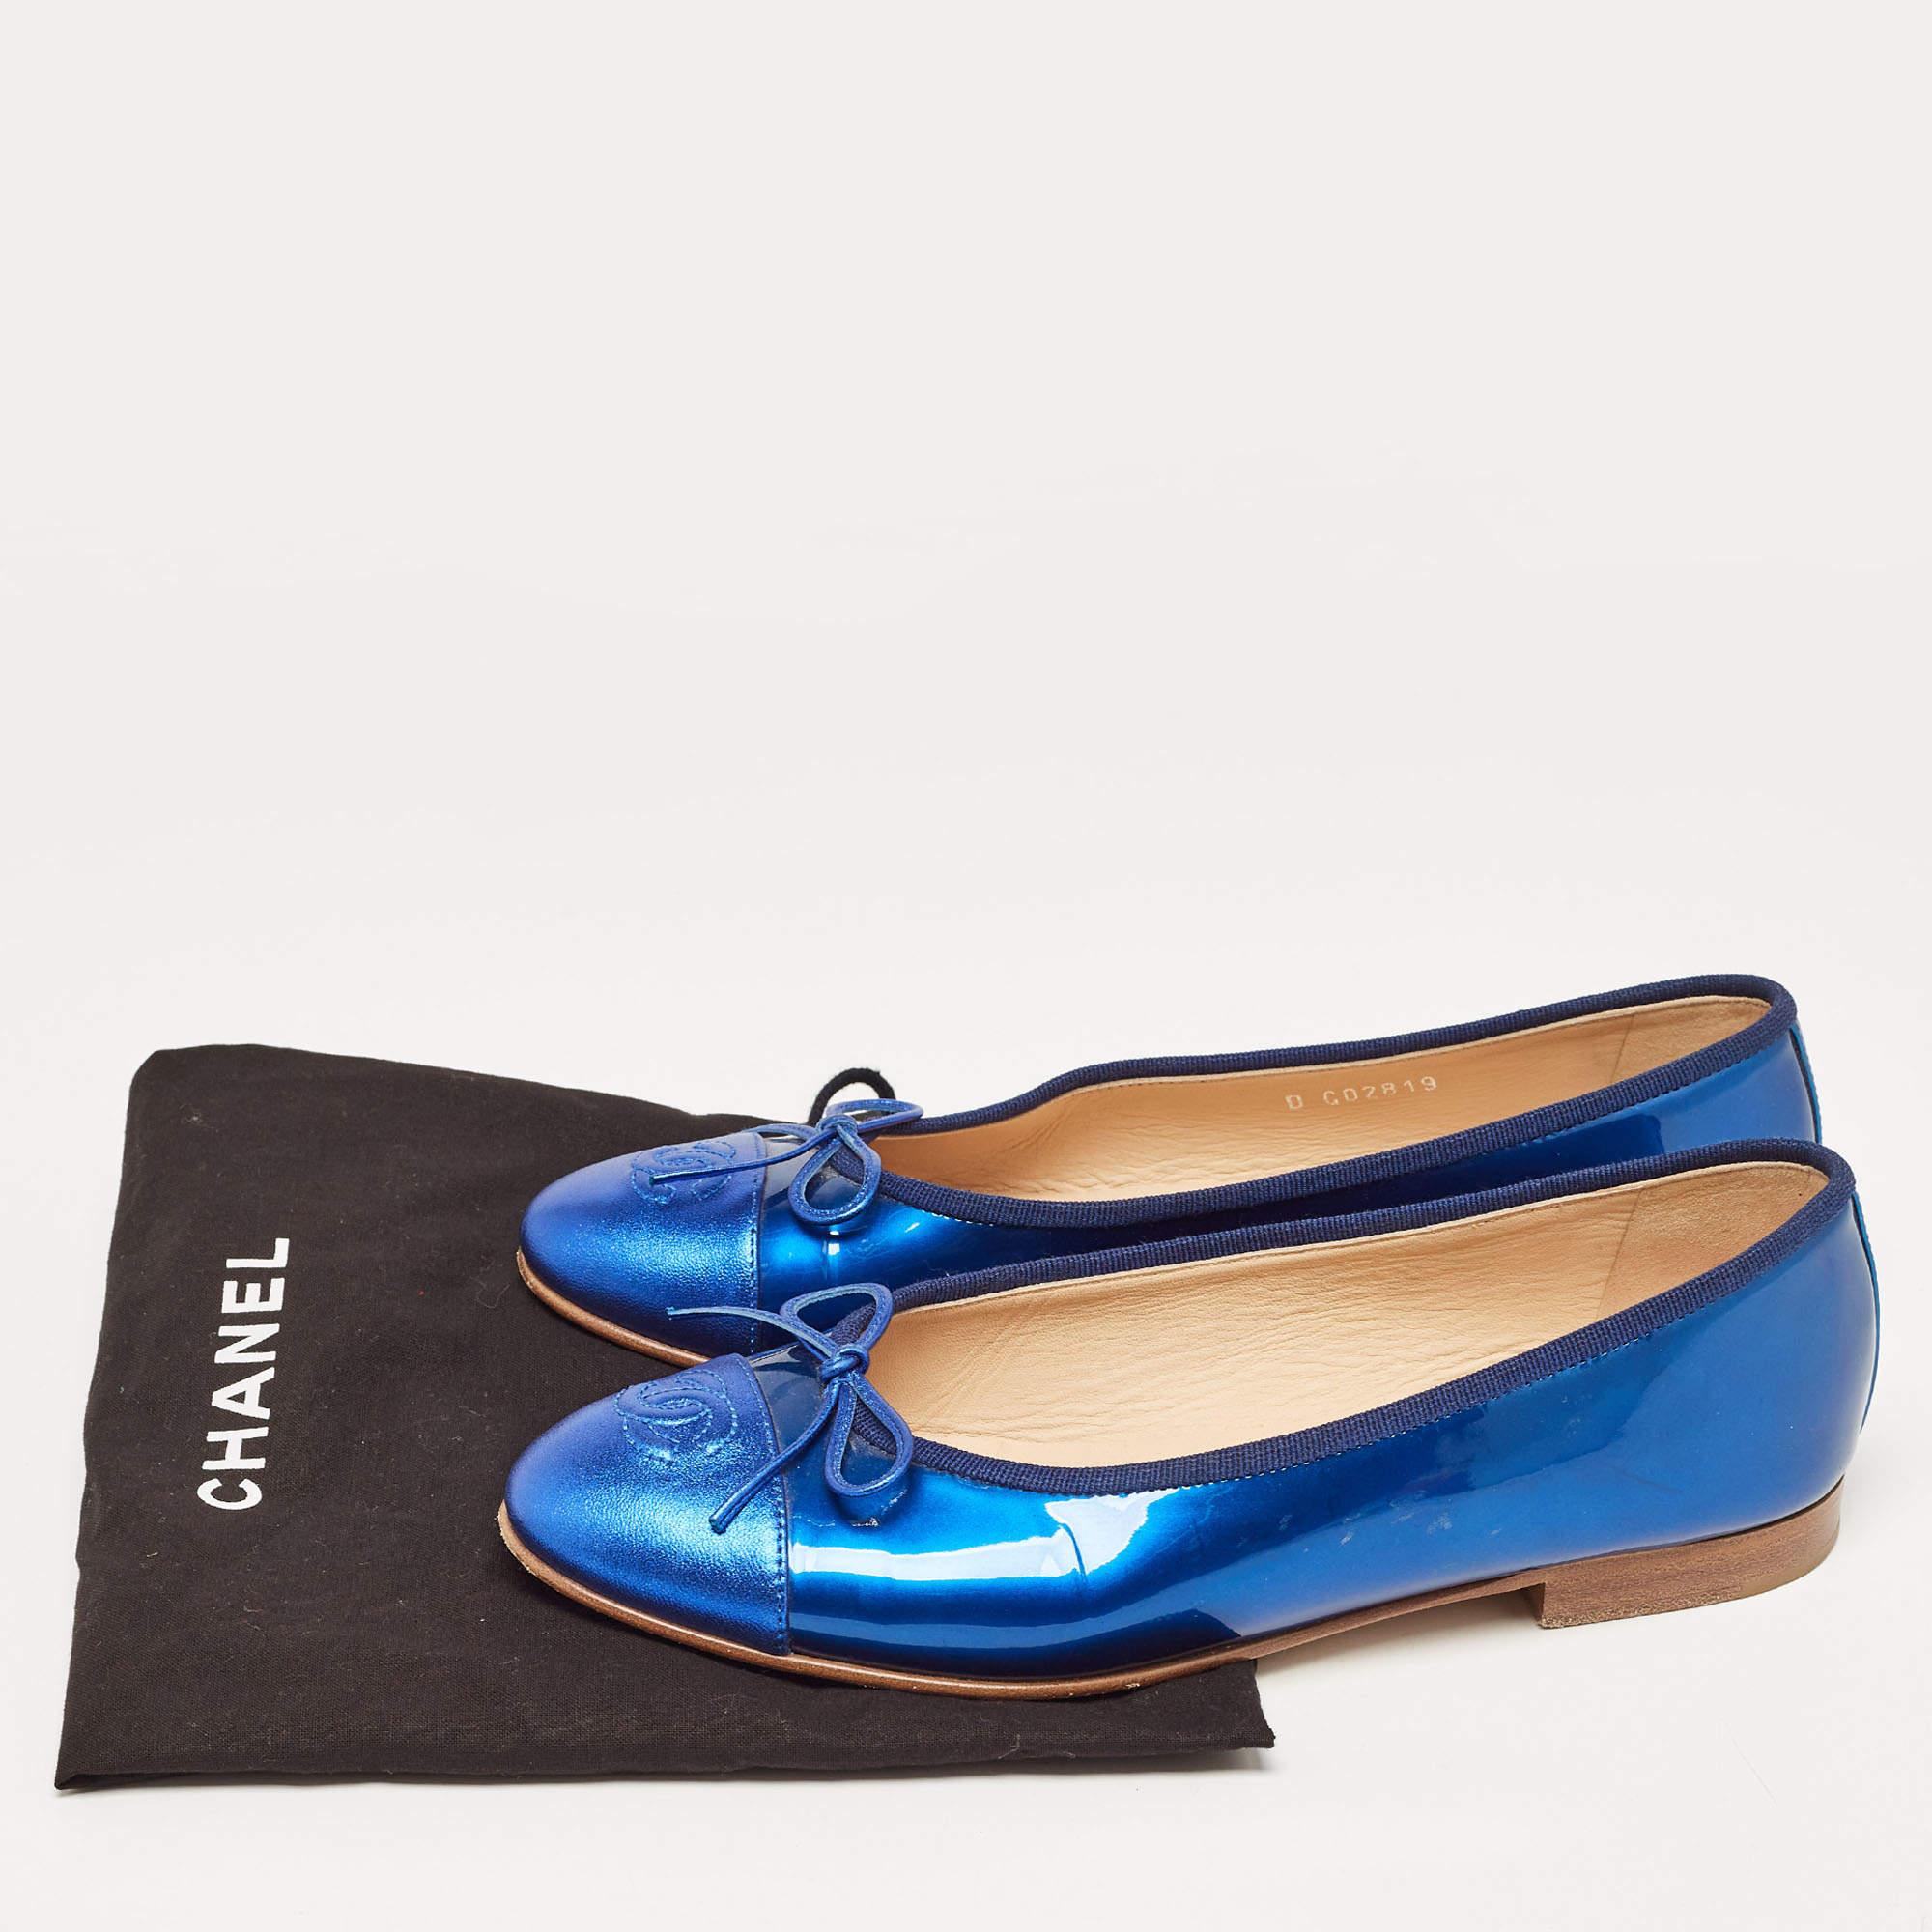 Chanel Blue Patent and Leather CC Cap Toe Bow Ballet Flats Size 38 6